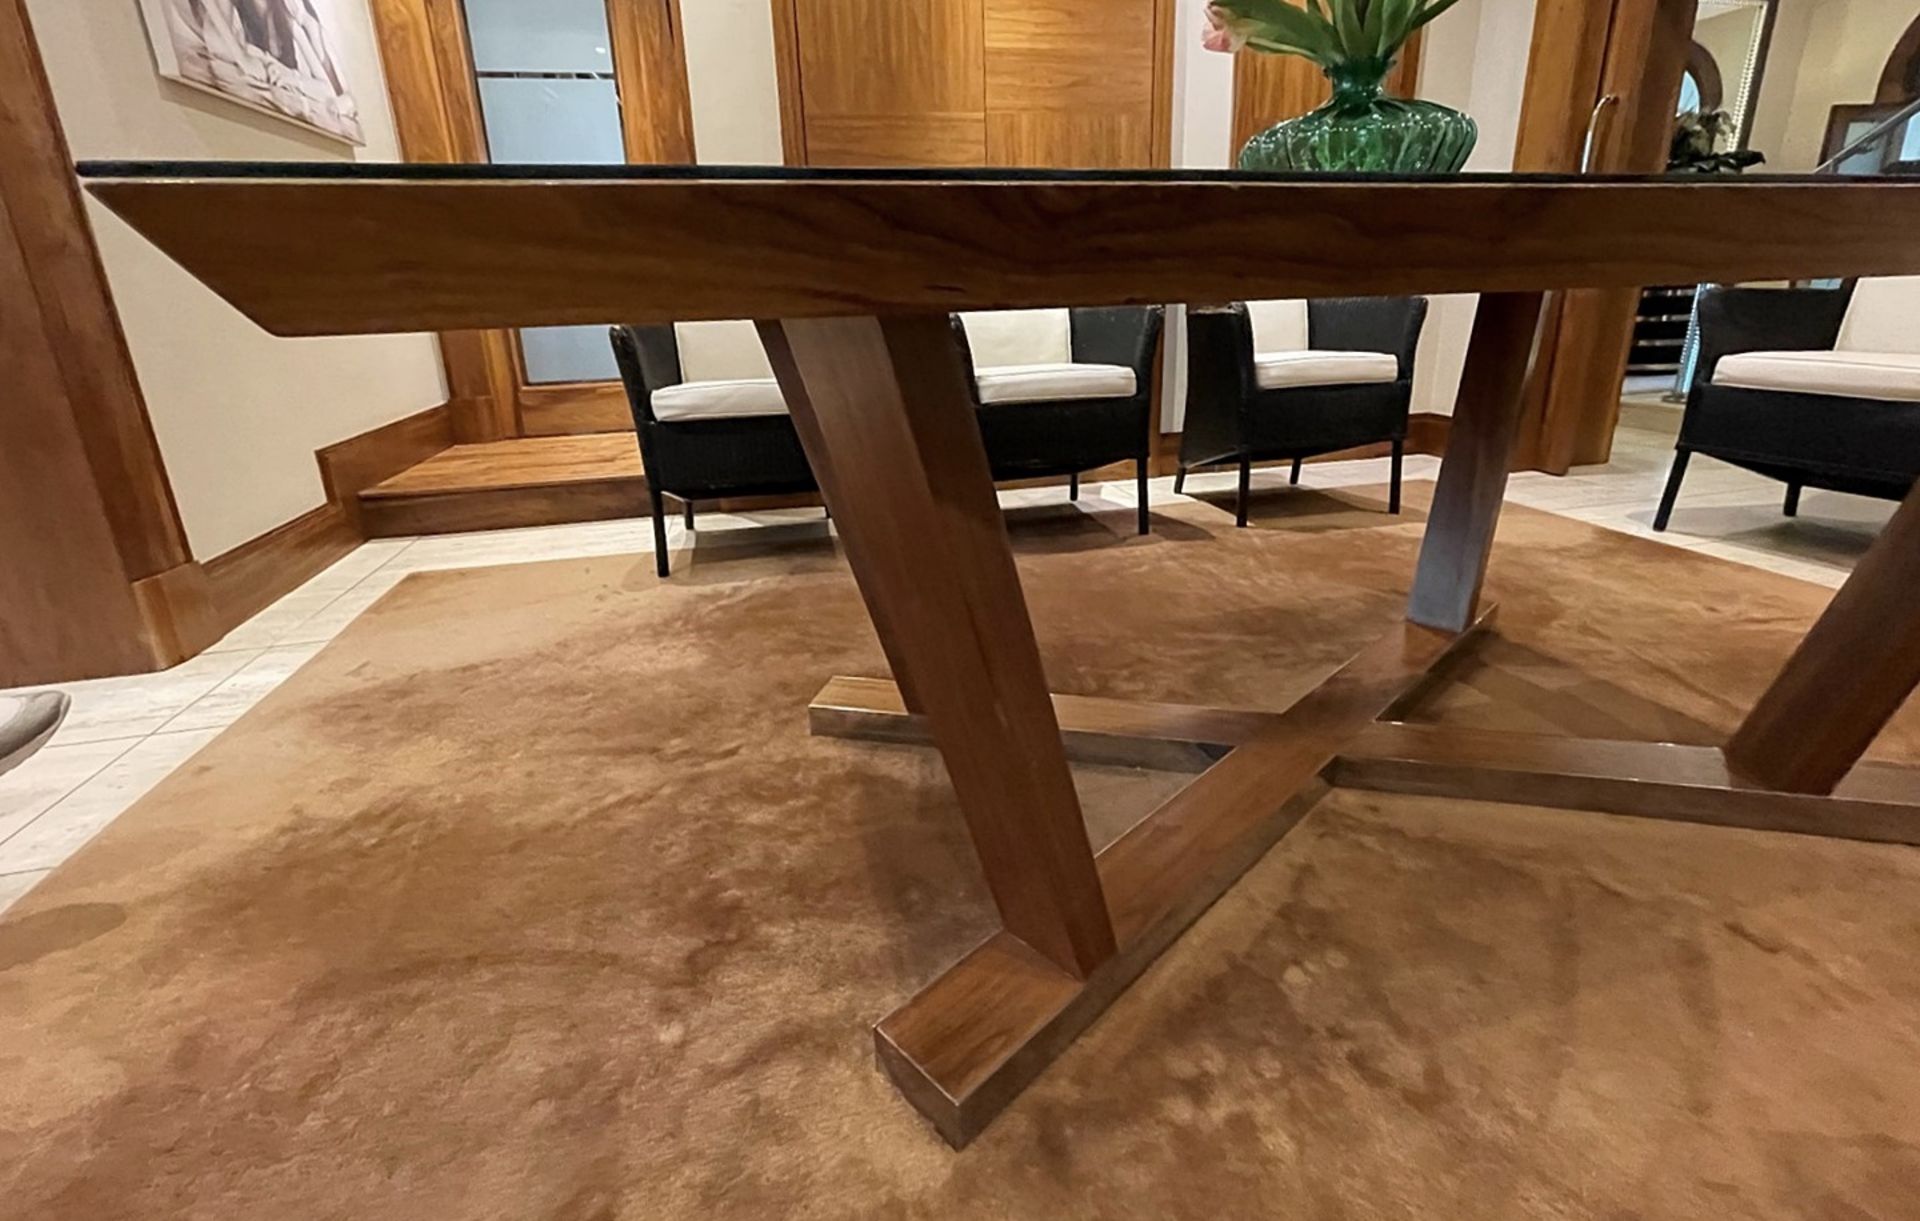 1 x Glass -Topped 2-Metre Long Dining Table In Walnut - Dimensions: 200 x 111 x H77cm - NO VAT - Image 11 of 16